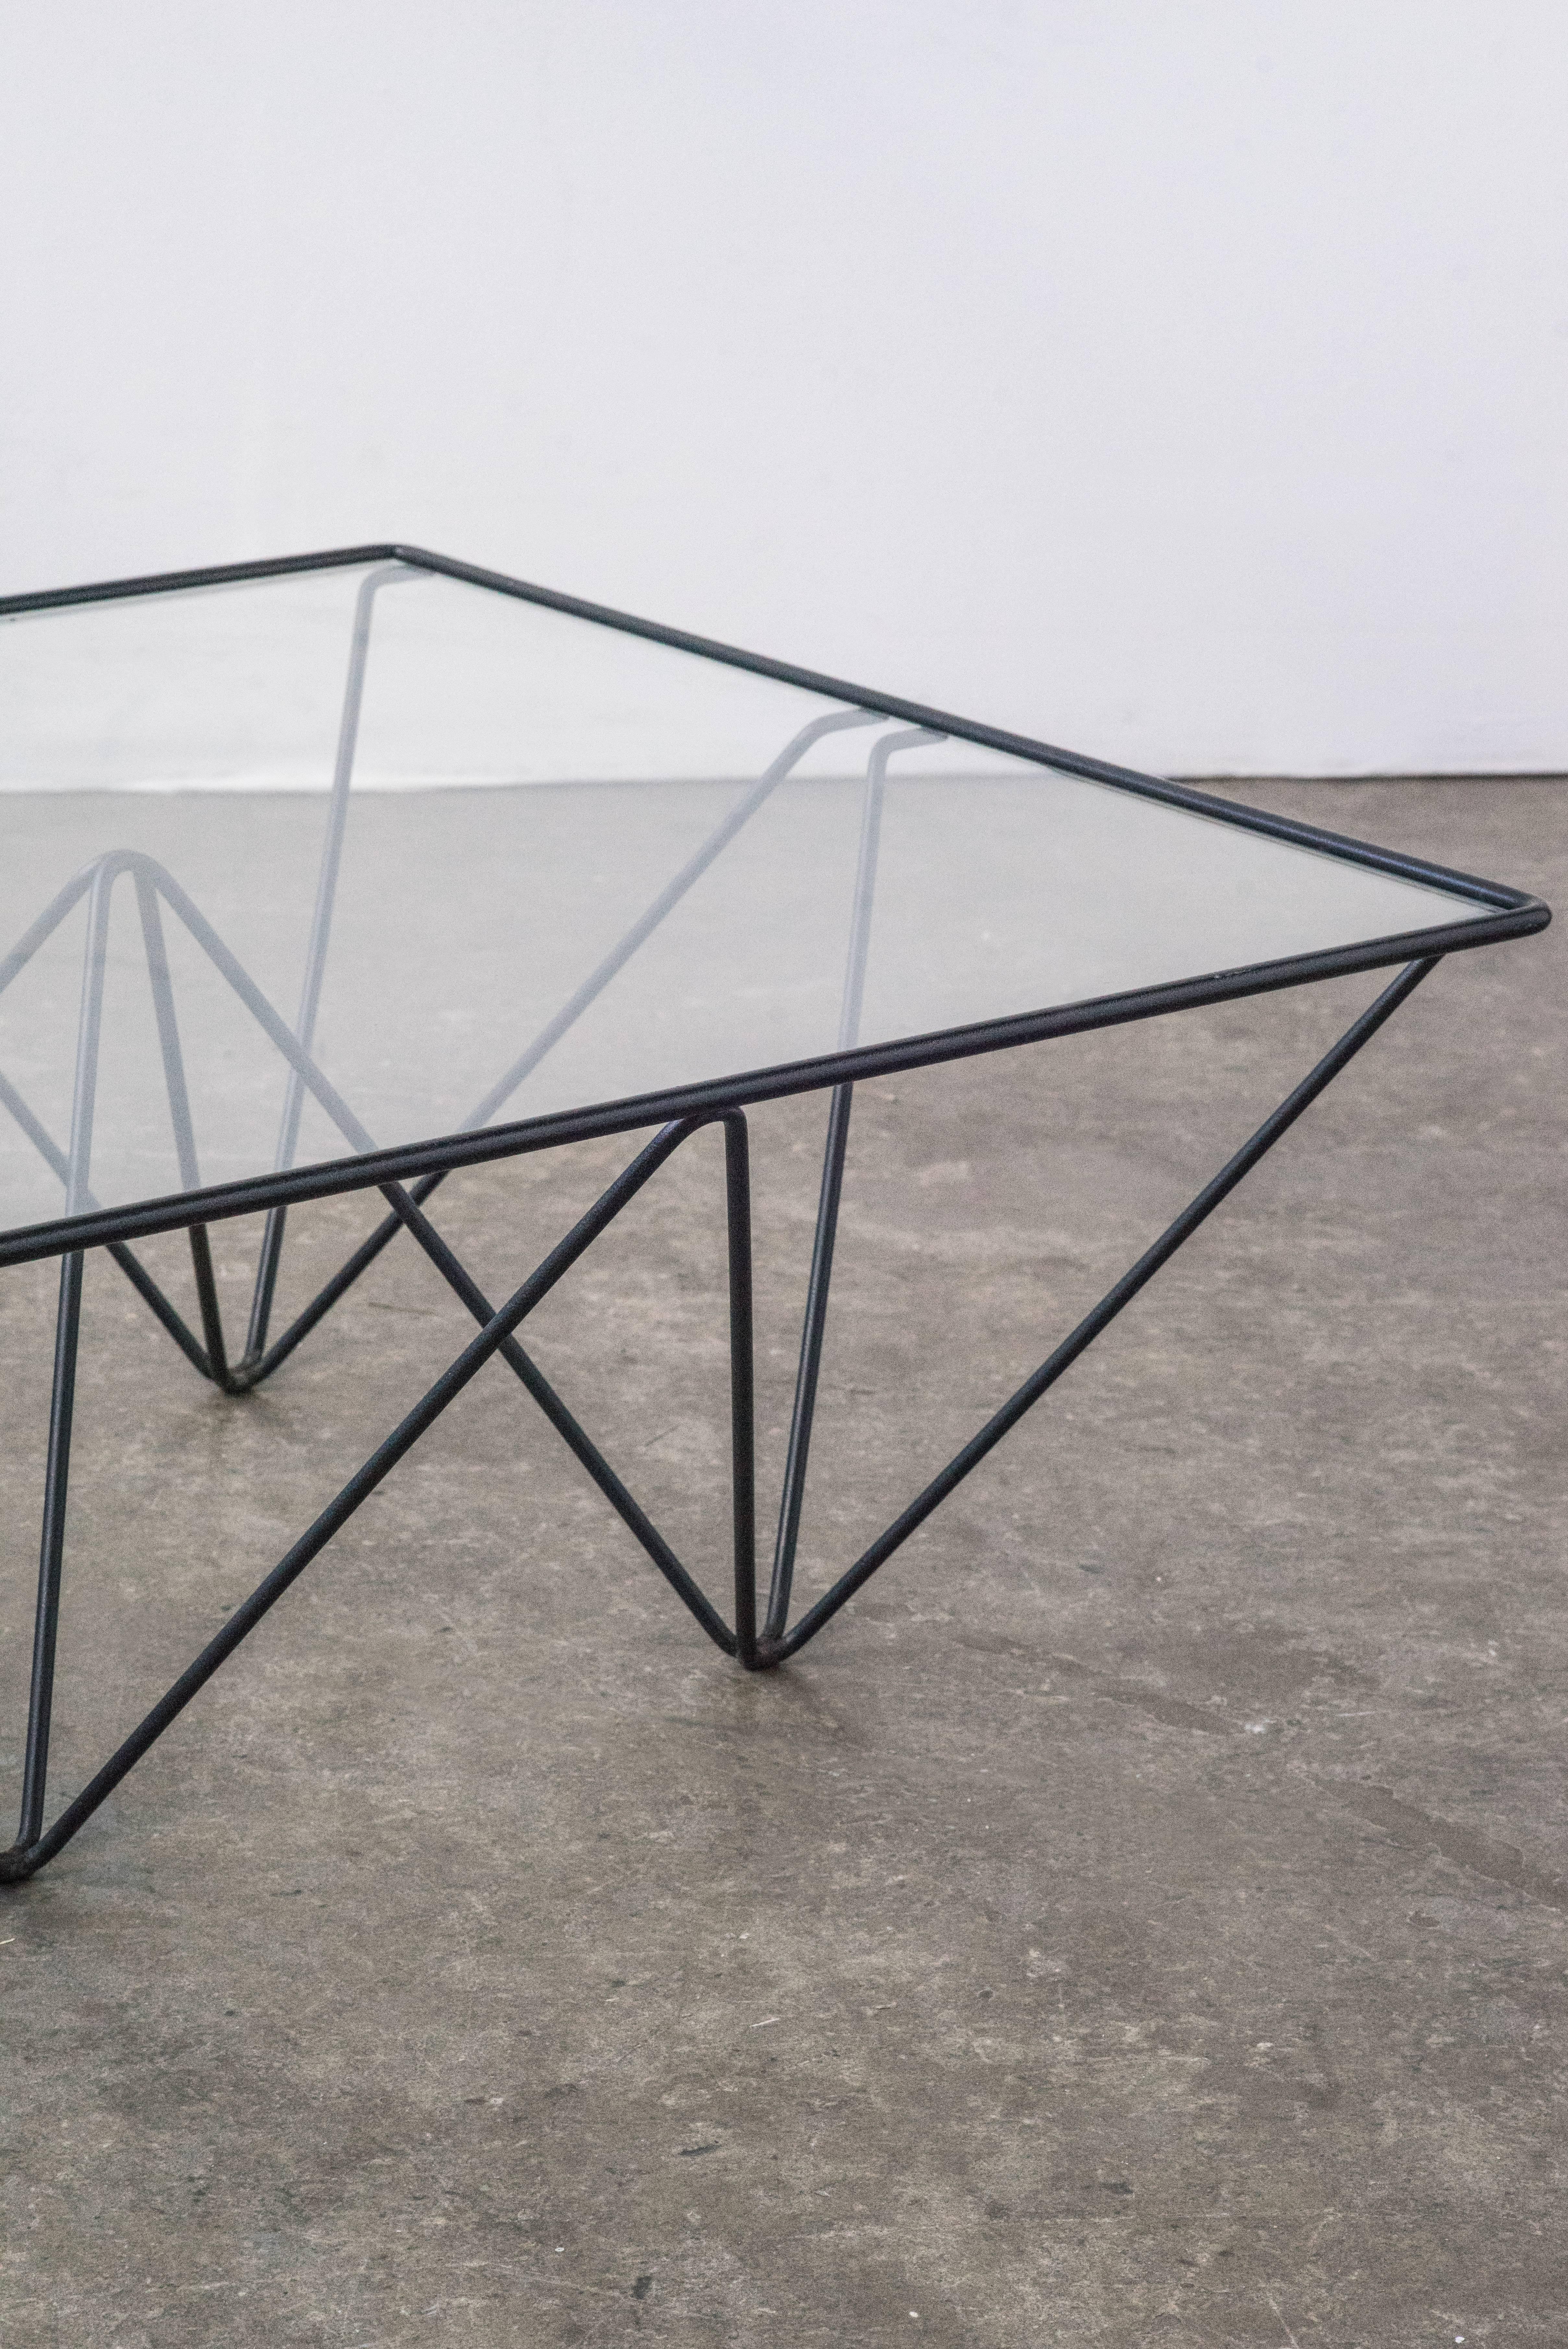 The iconic wireframe cocktail table in the style of Paolo Piva. Glass is Italian and appears to be original but in excellent condition.